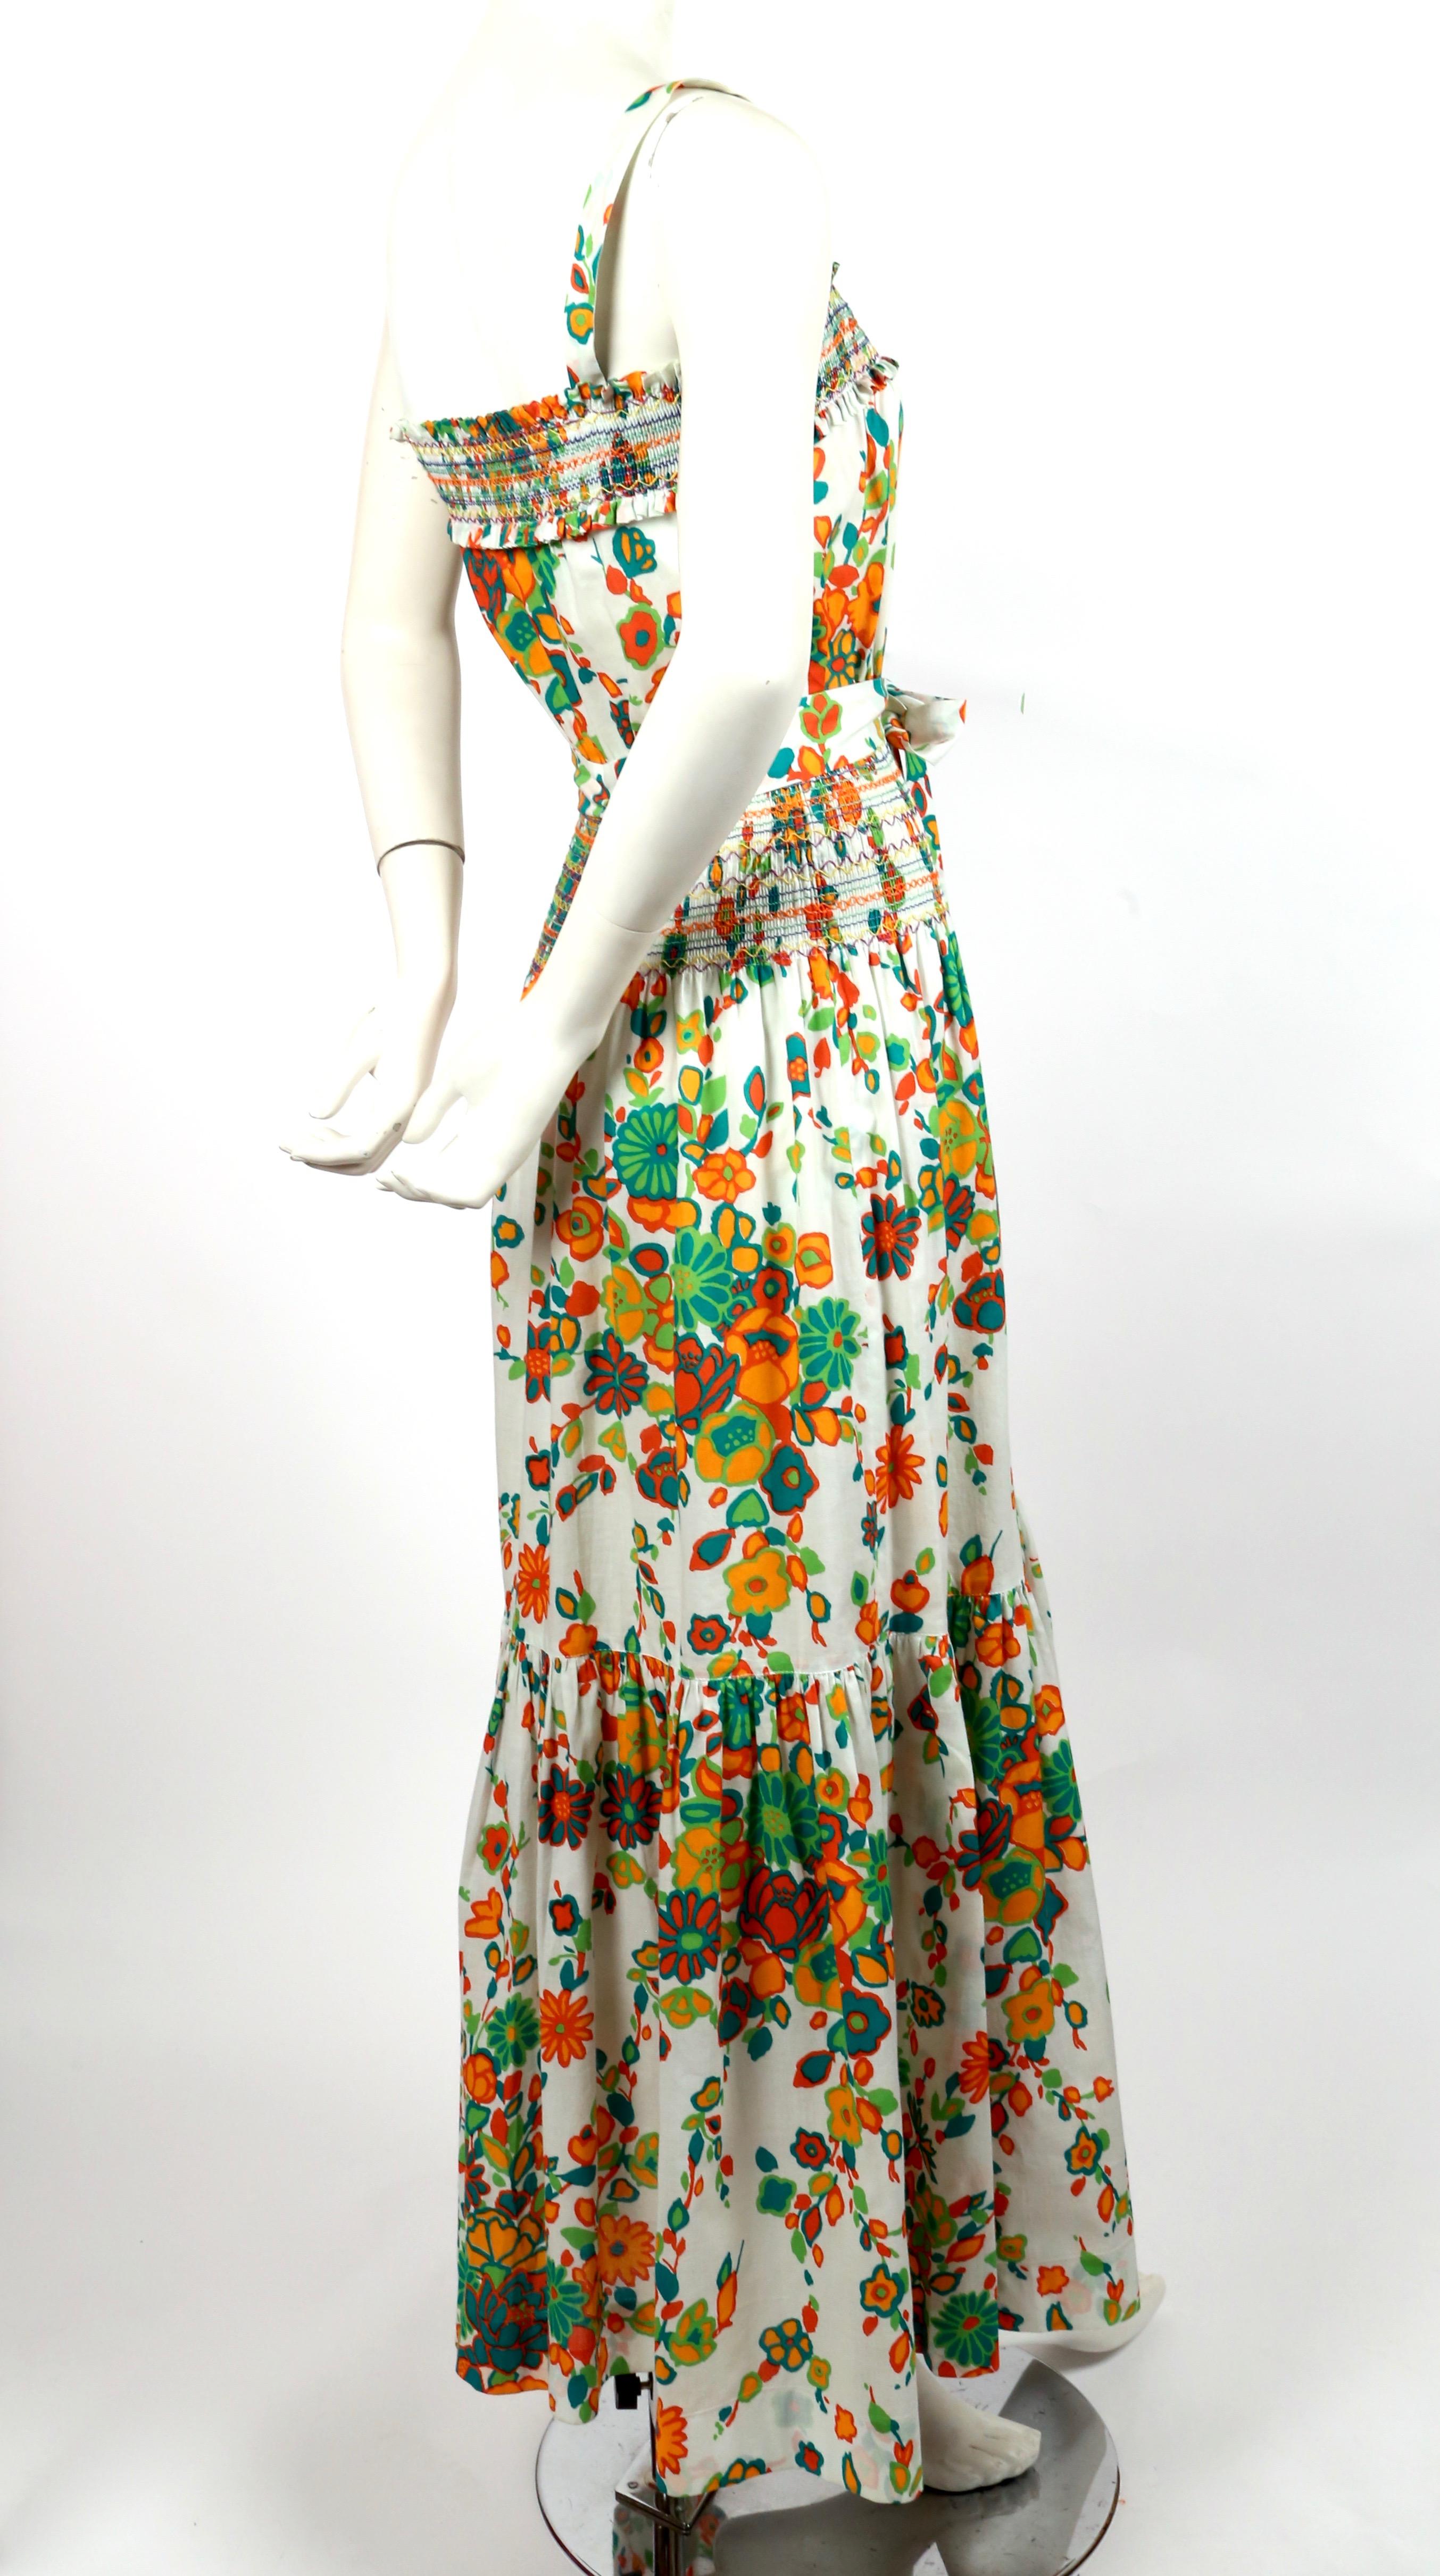 Very rare, white, cotton, floral printed dress with multi-colored hand-stitching and long waist tie from Yves Saint Laurent dating to the 1970's. Labeled a French size 36. Approximate measurements: up to a 33